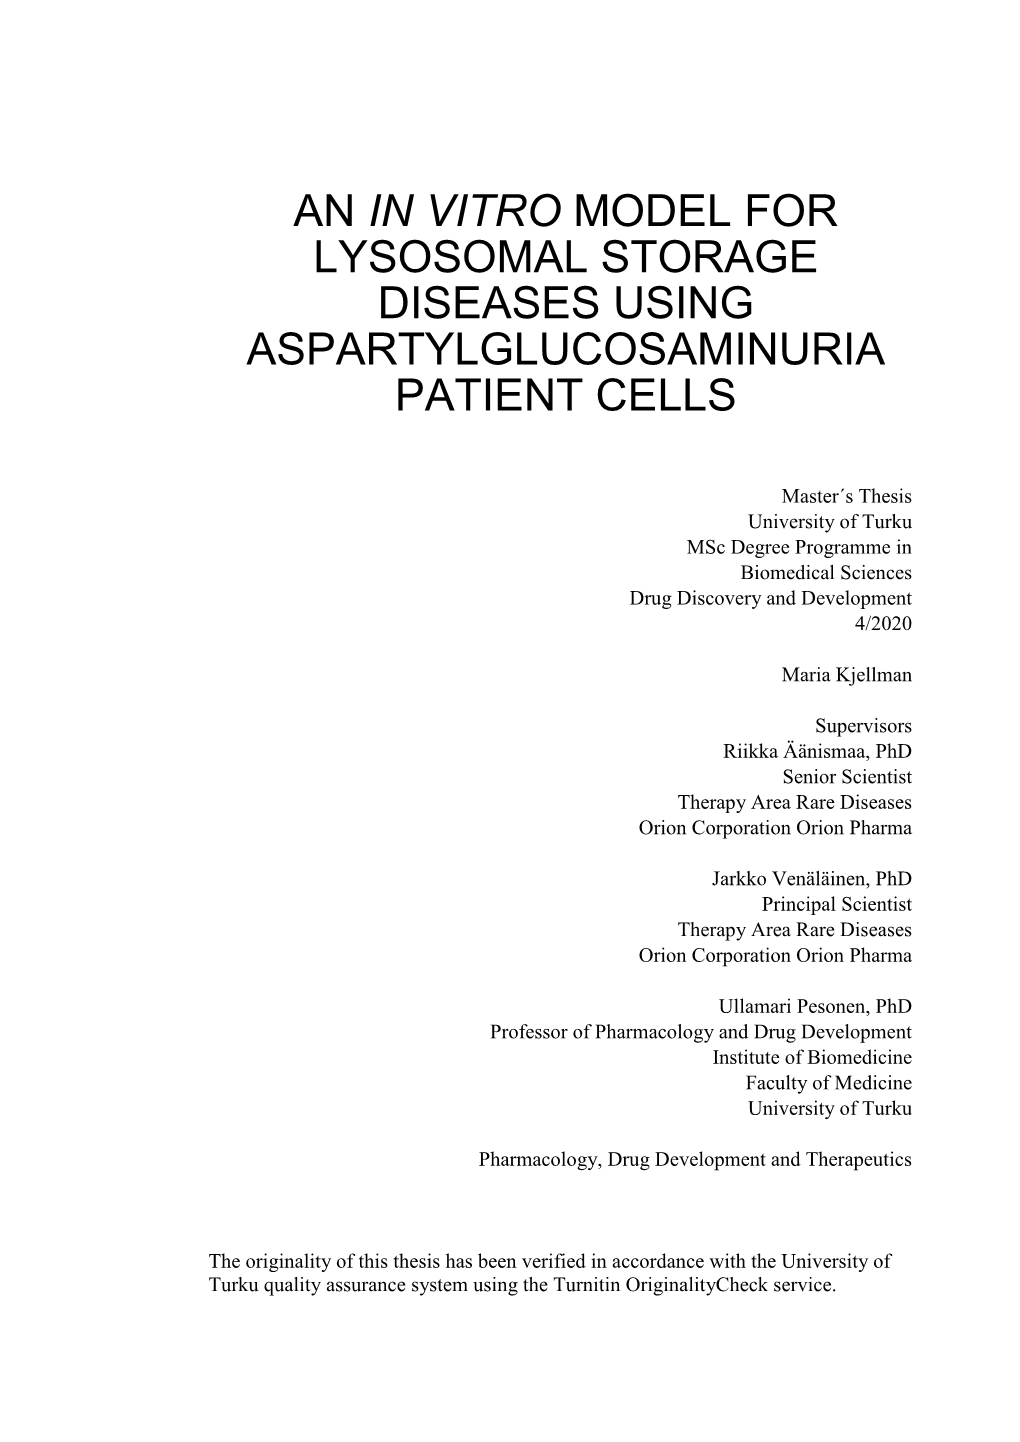 An in Vitro Model for Lysosomal Storage Diseases Using Aspartylglucosaminuria Patient Cells